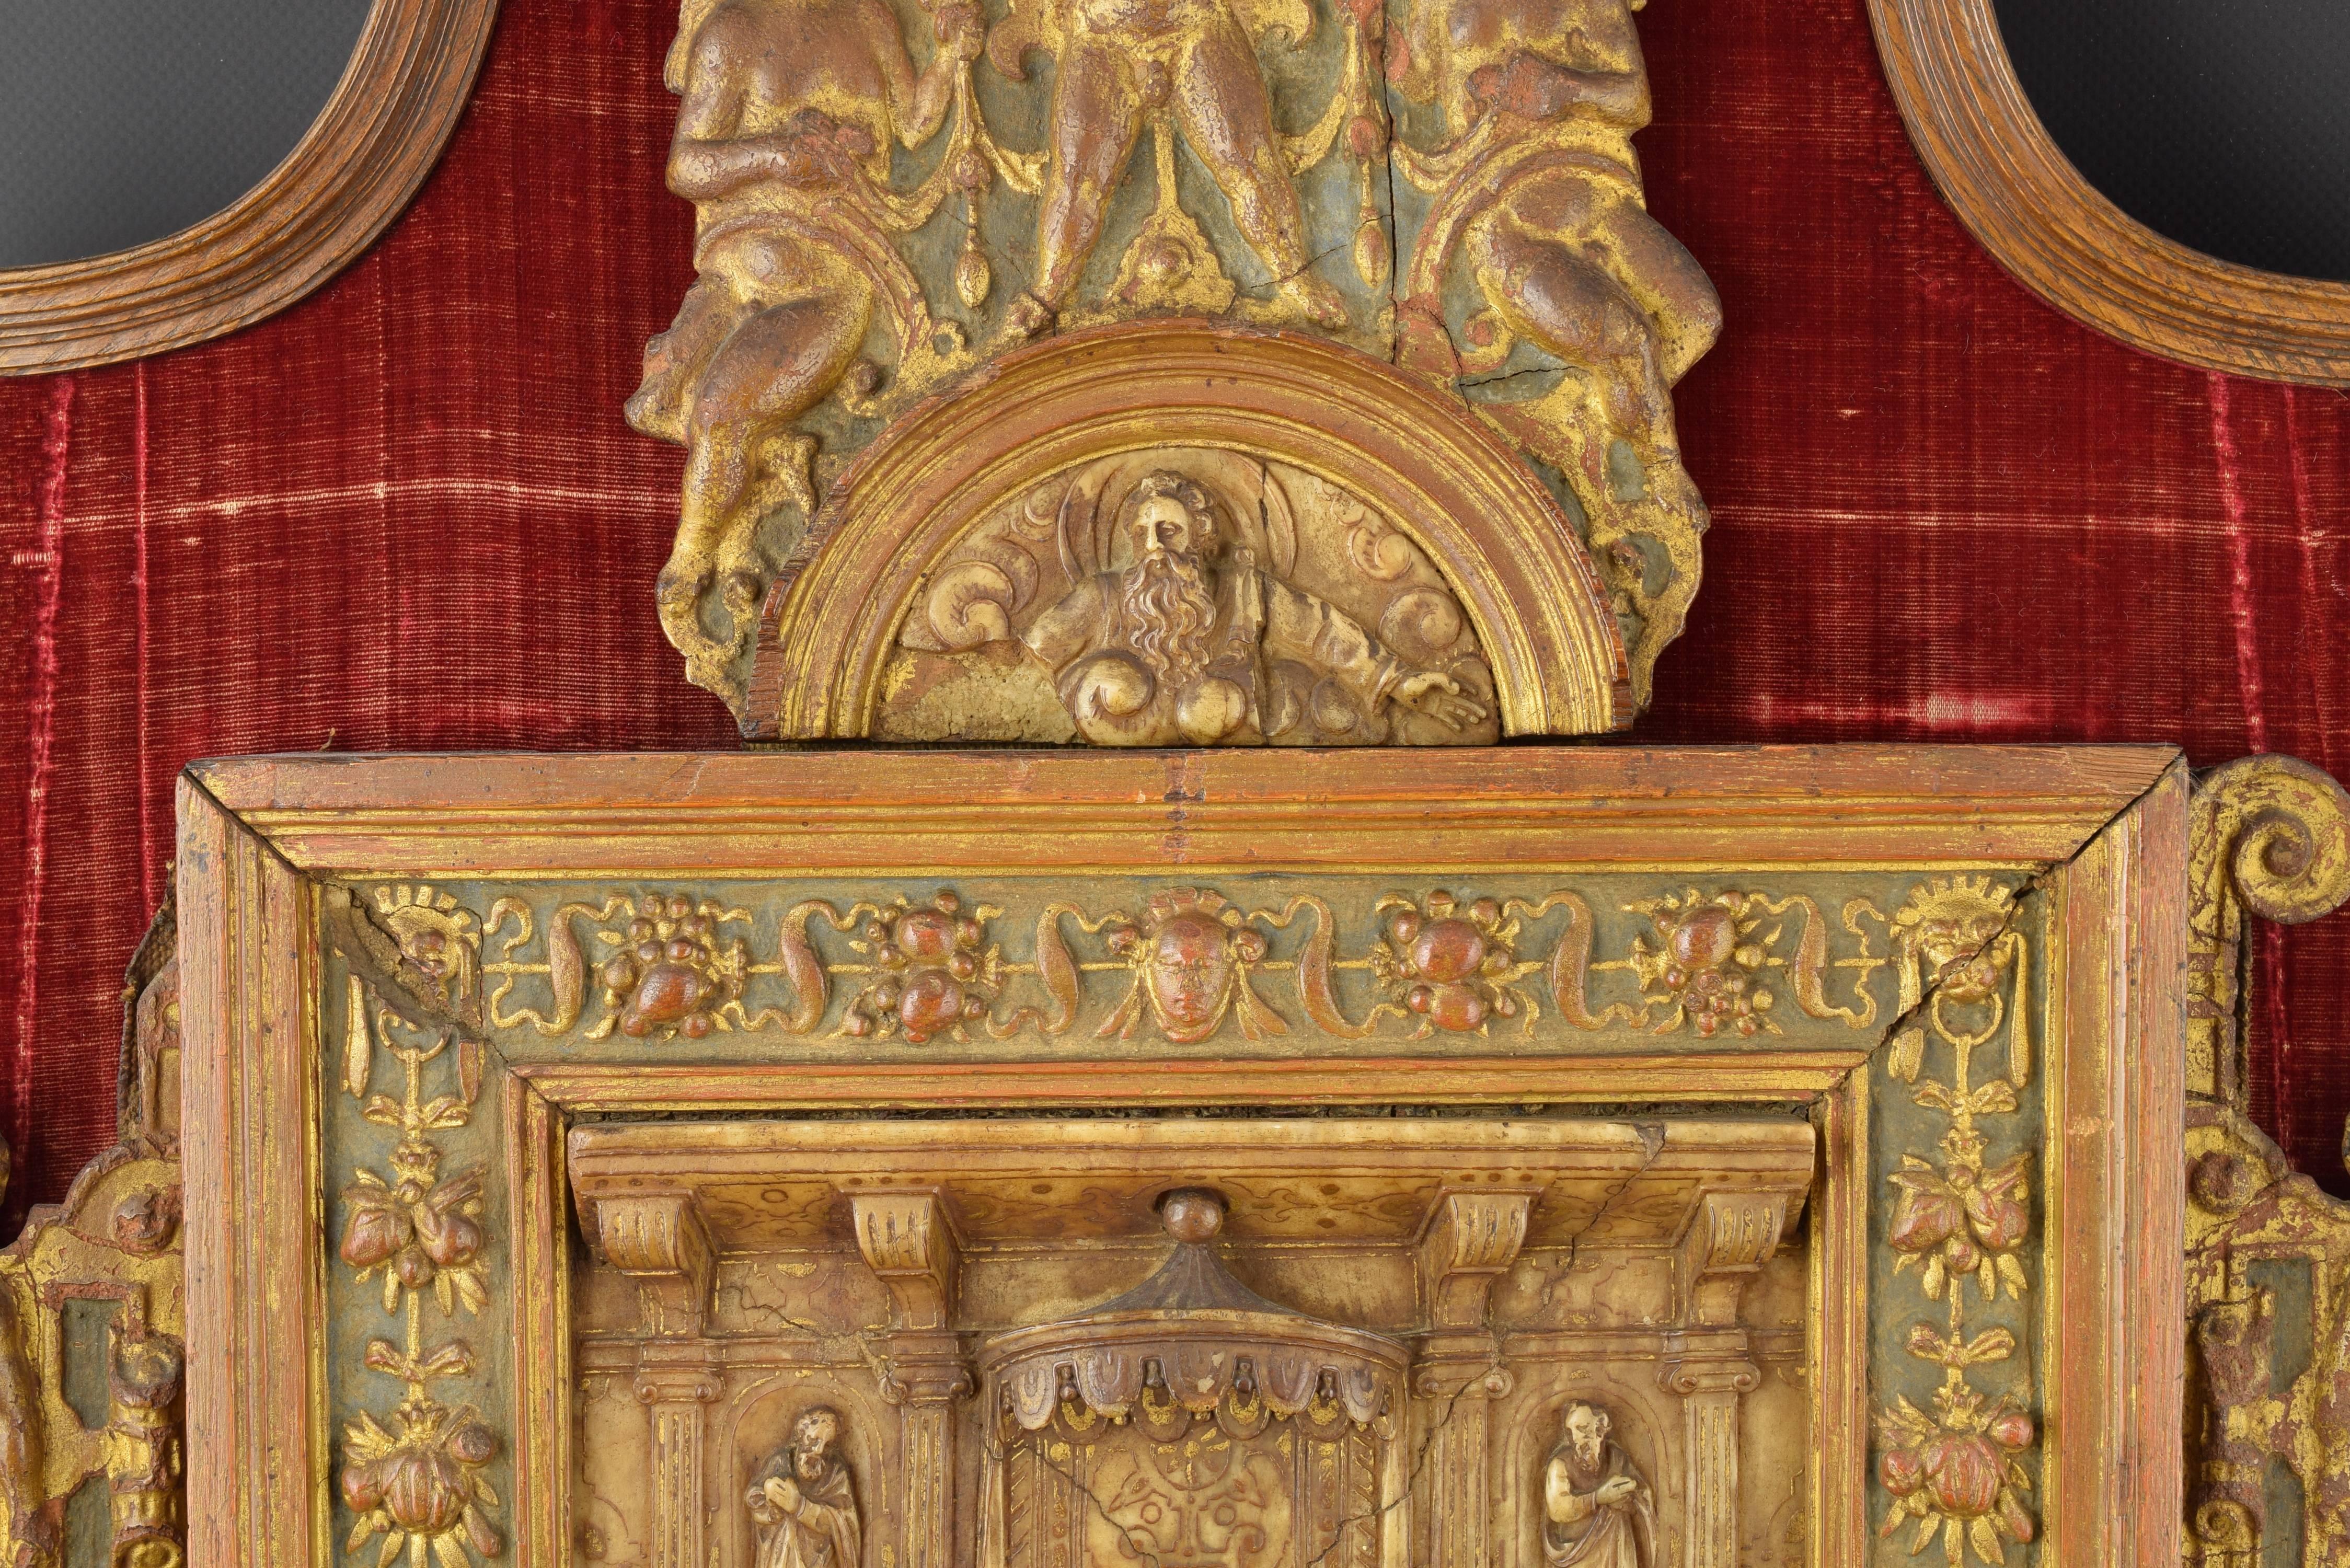 European Domestic Altar, Alabaster and Wood, Possibly Malines ‘Mechelen’ Mid-16th Century